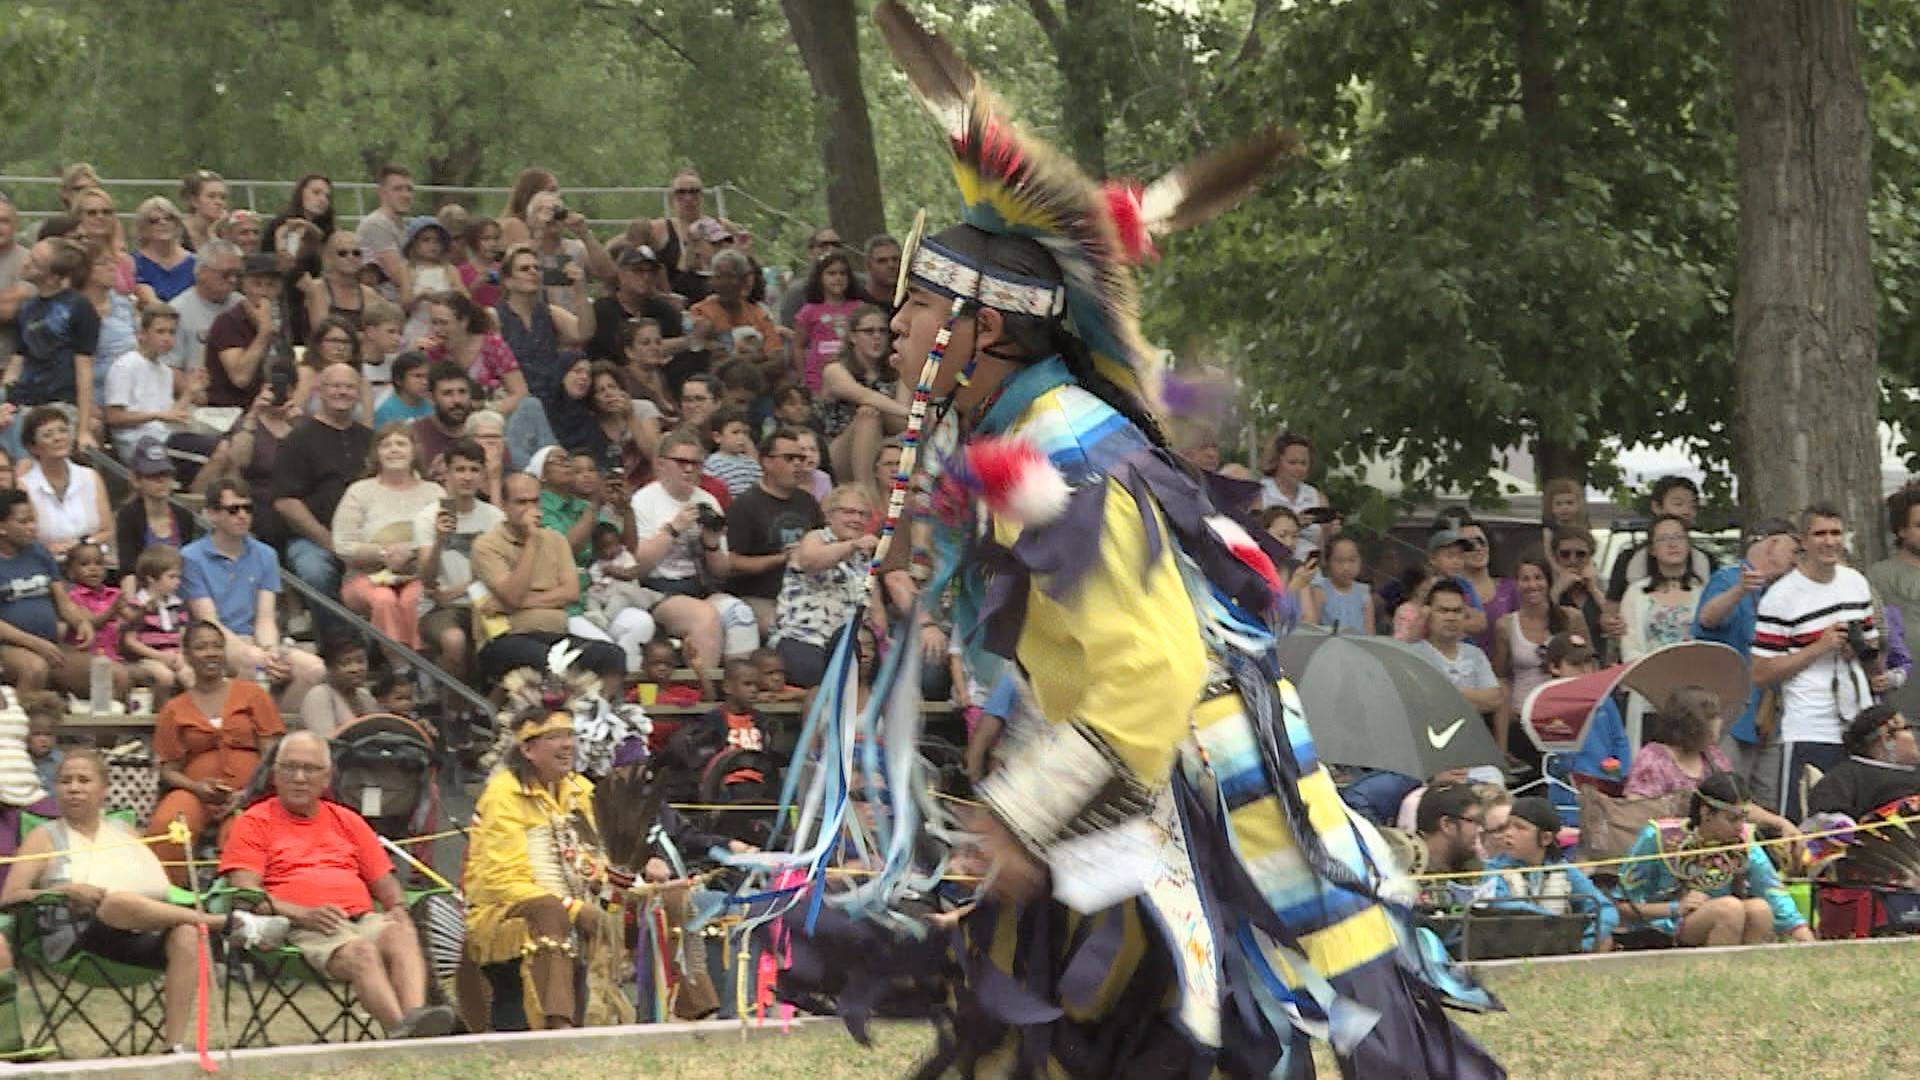 Kahnawake hopes for reconciliation with 28th annual powwow